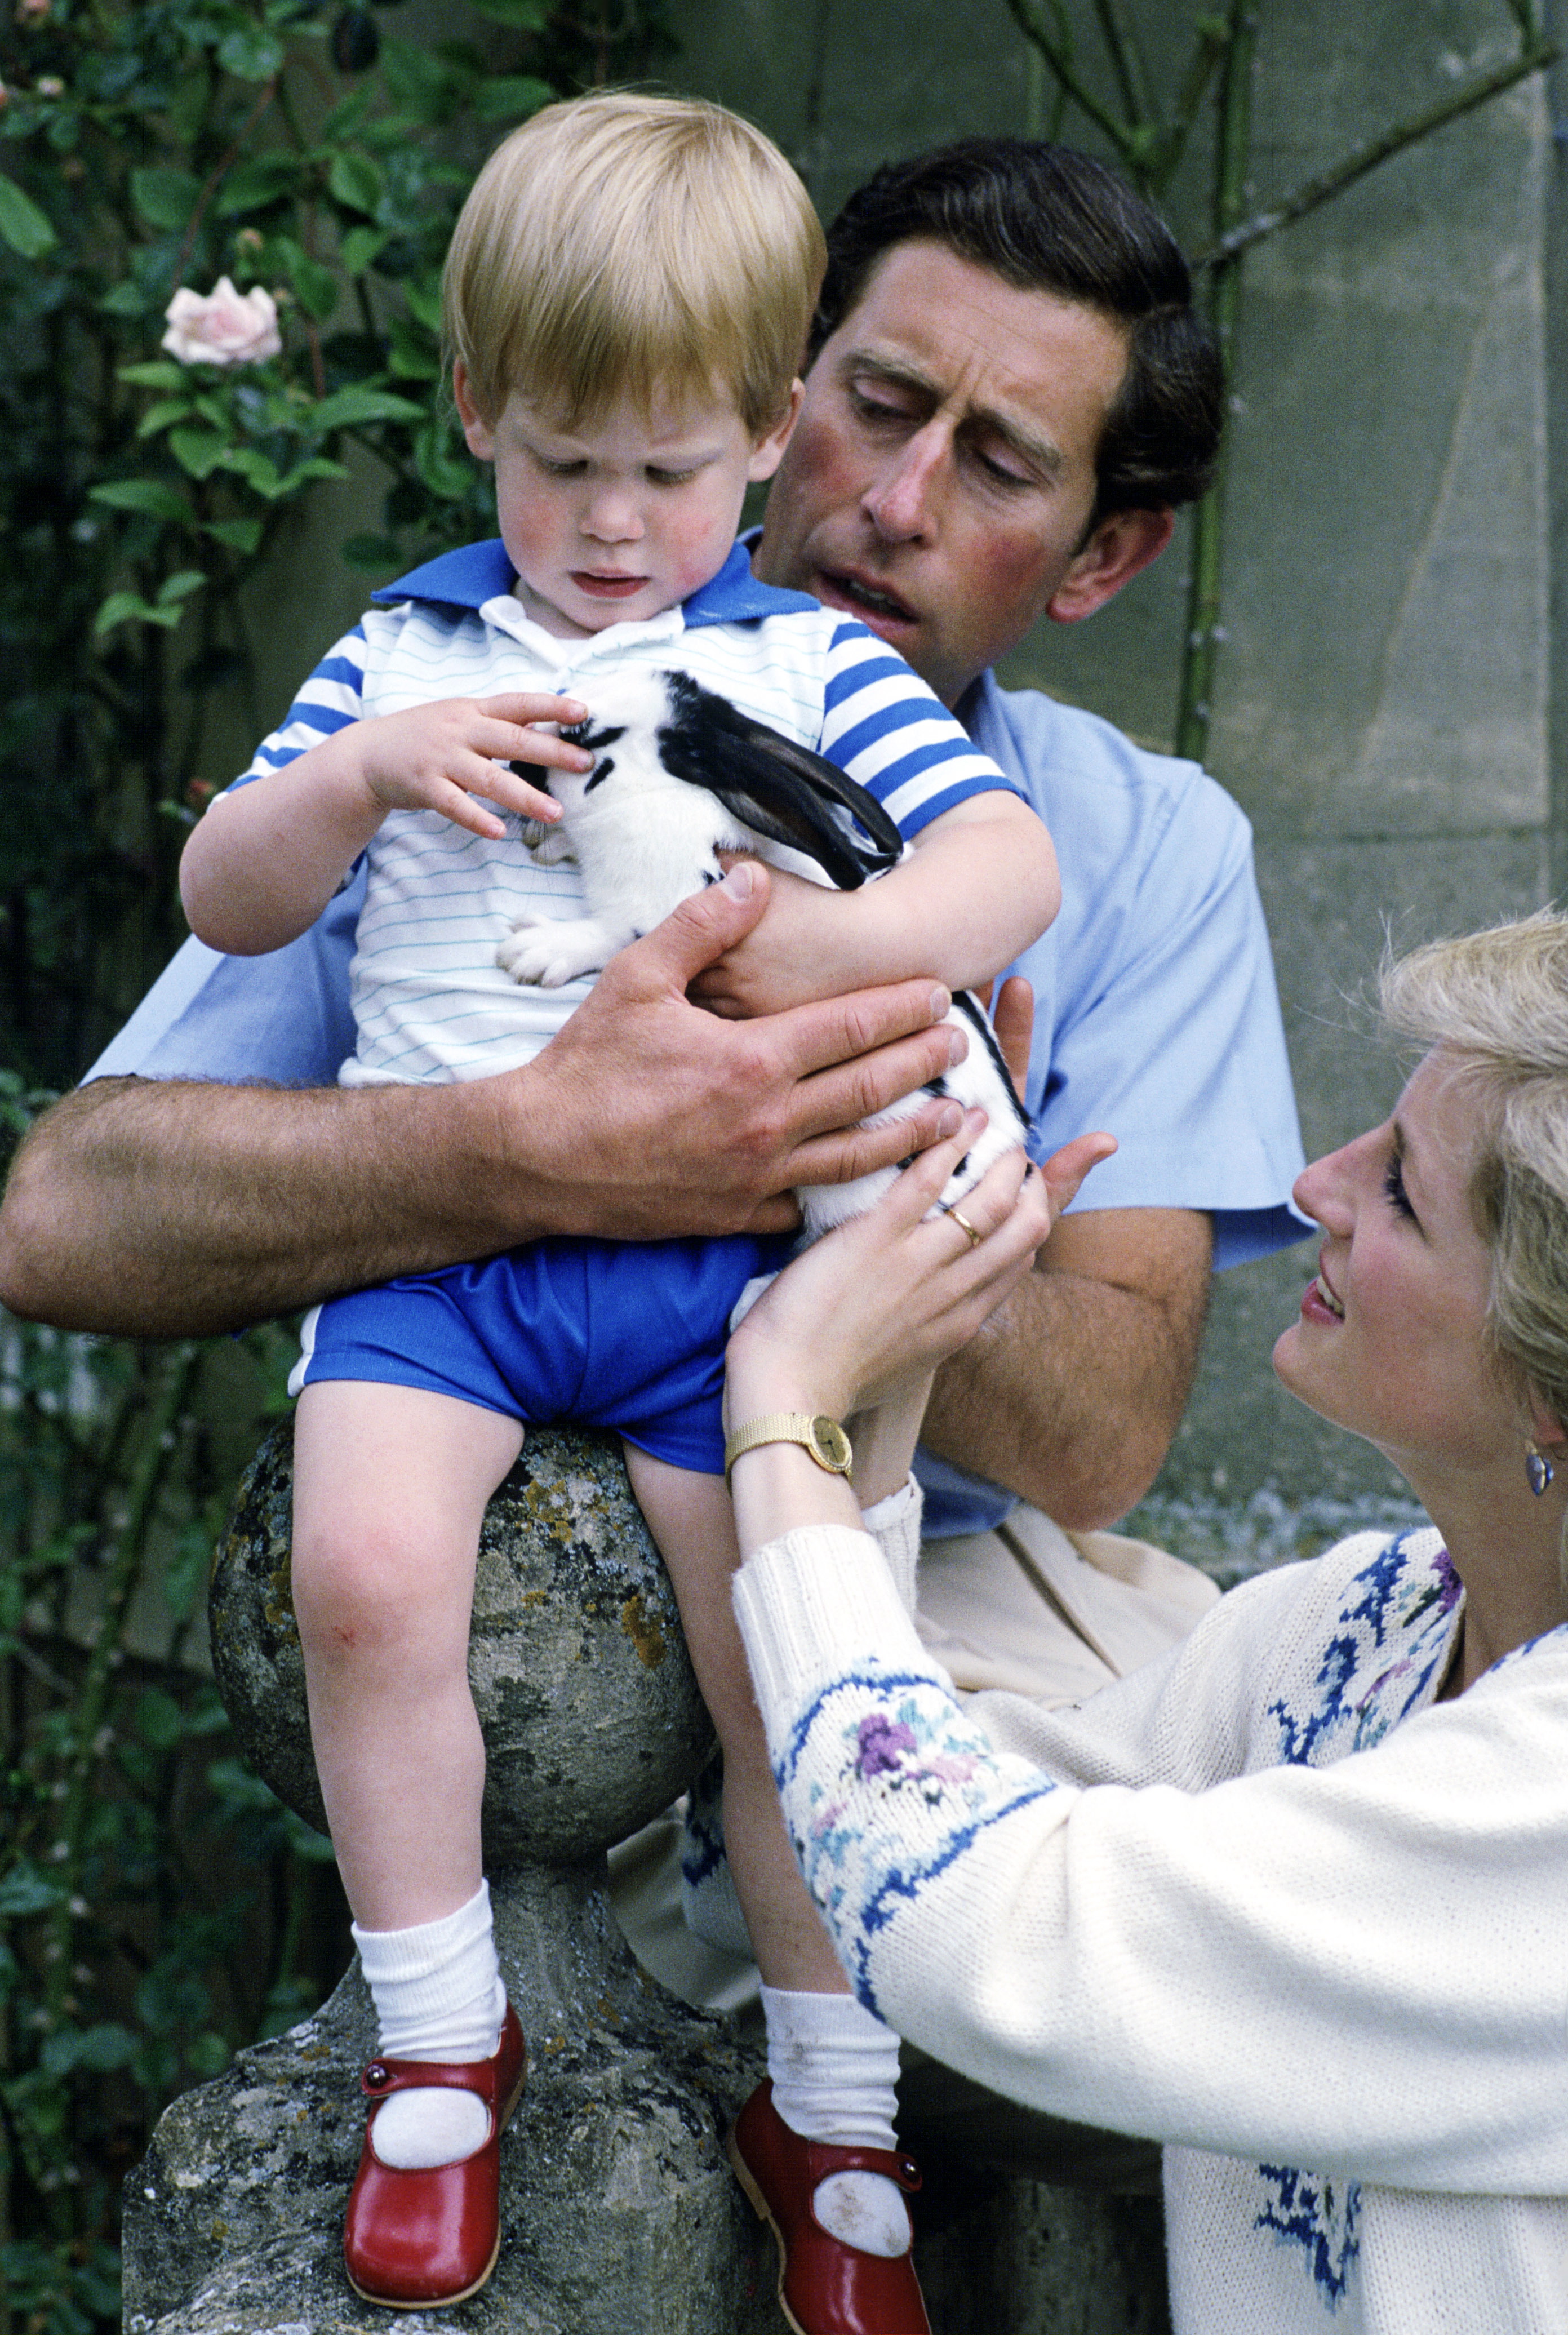 Diana Princess of Wales, Charles Prince of Wales and Prince Harry on July 14, 1986 in Highgrove, United Kingdom | Source: Getty Images